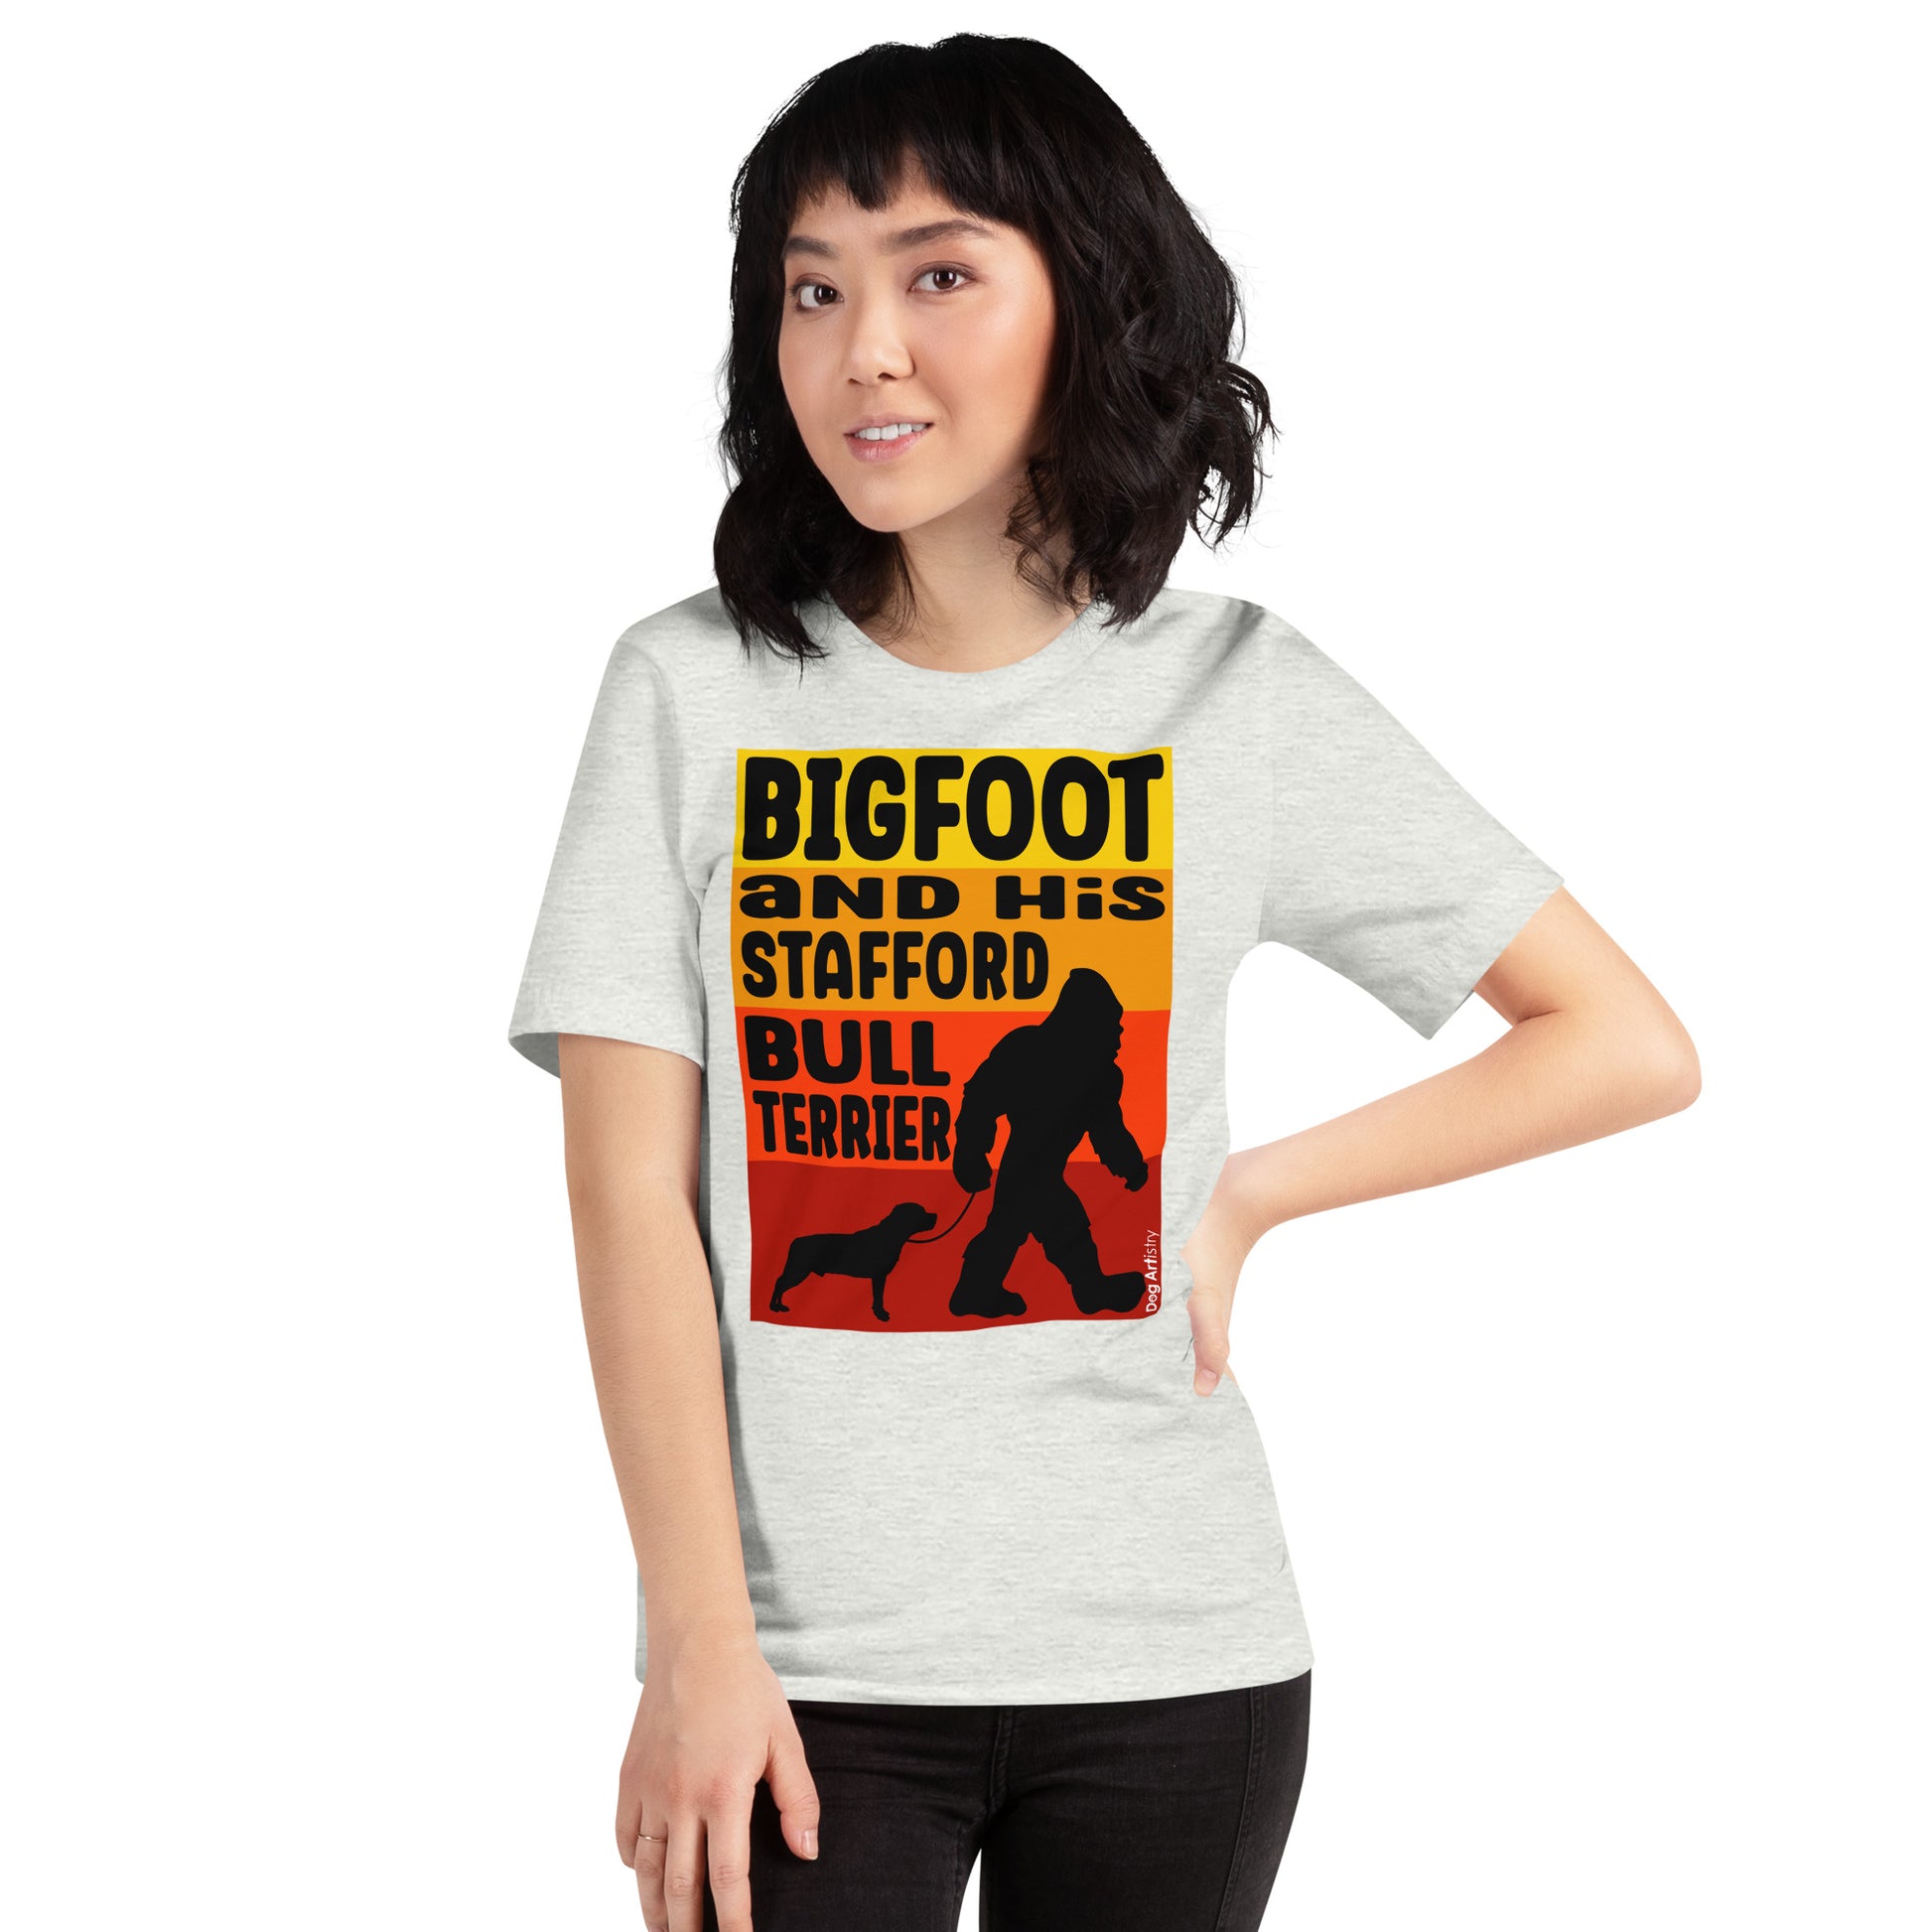 Bigfoot and his Staffordshire Bull Terrier unisex ash t-shirt by Dog Artistry.